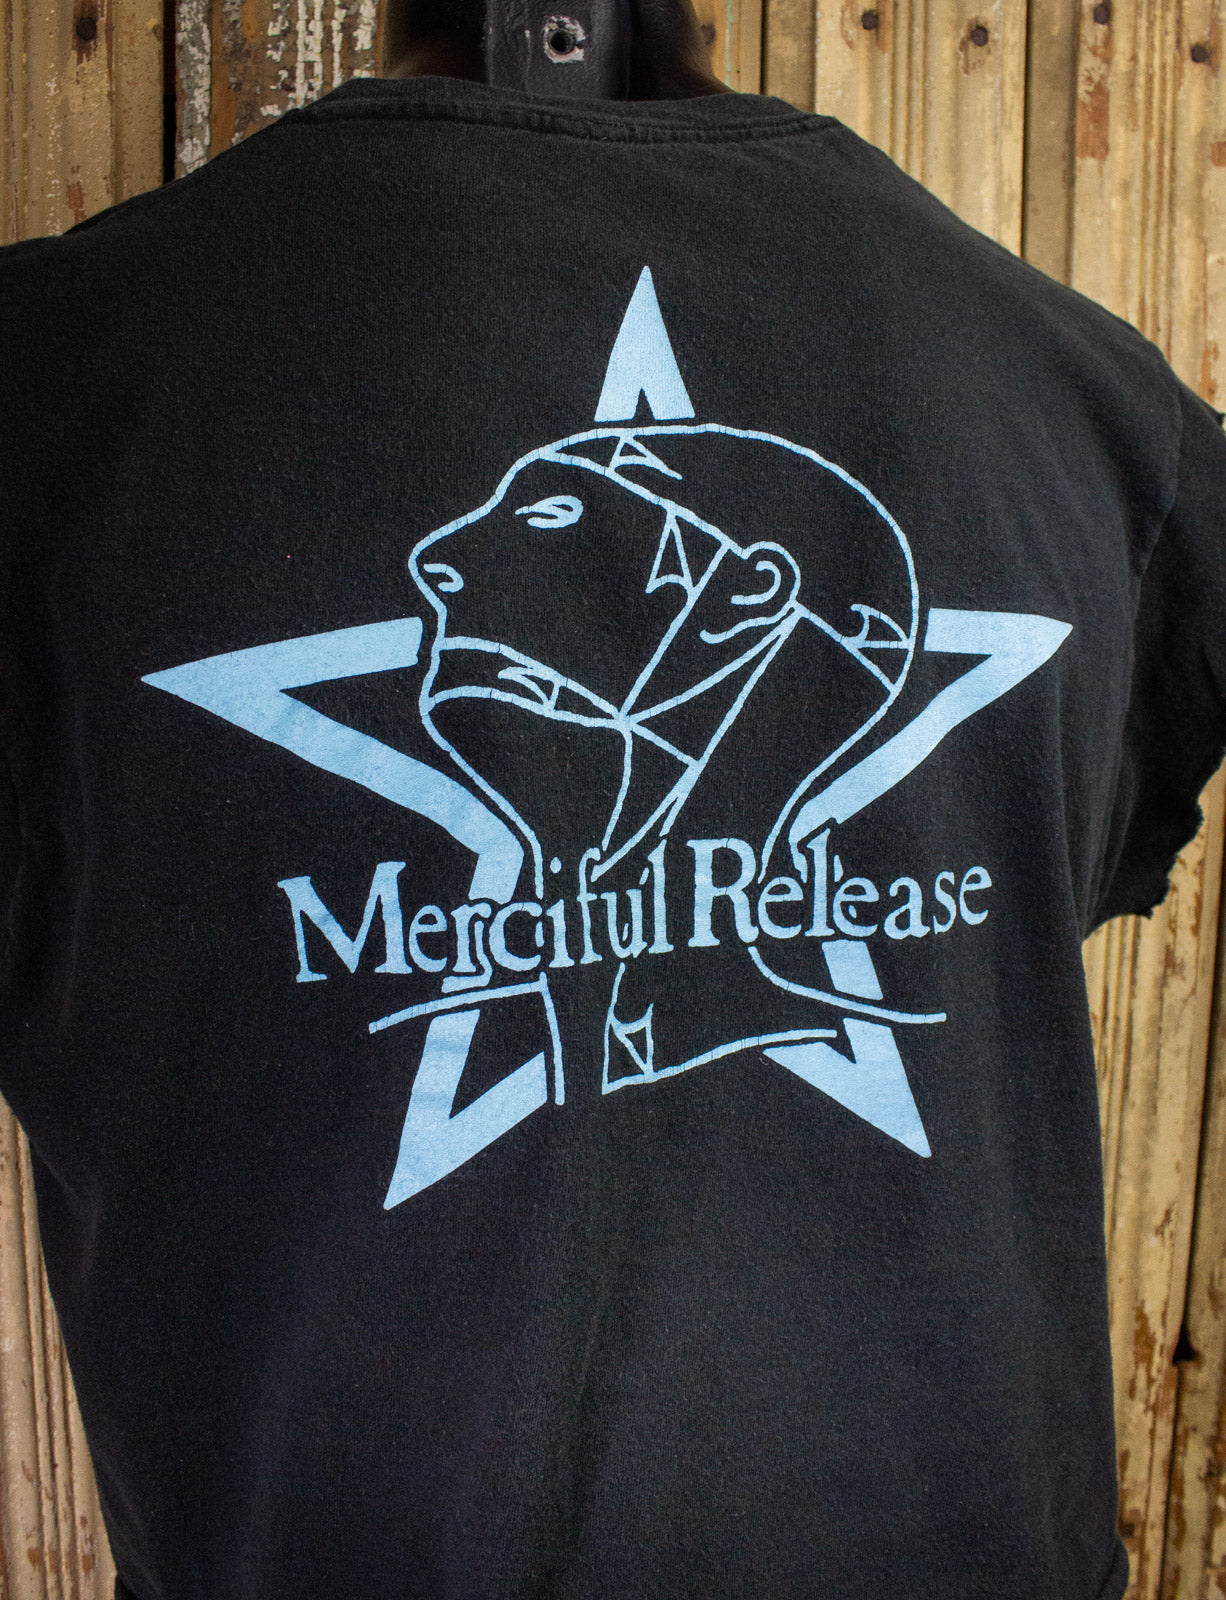 The Sisters Of Mercy Merciful Release Cropped Concert T Shirt 2007 Black Large